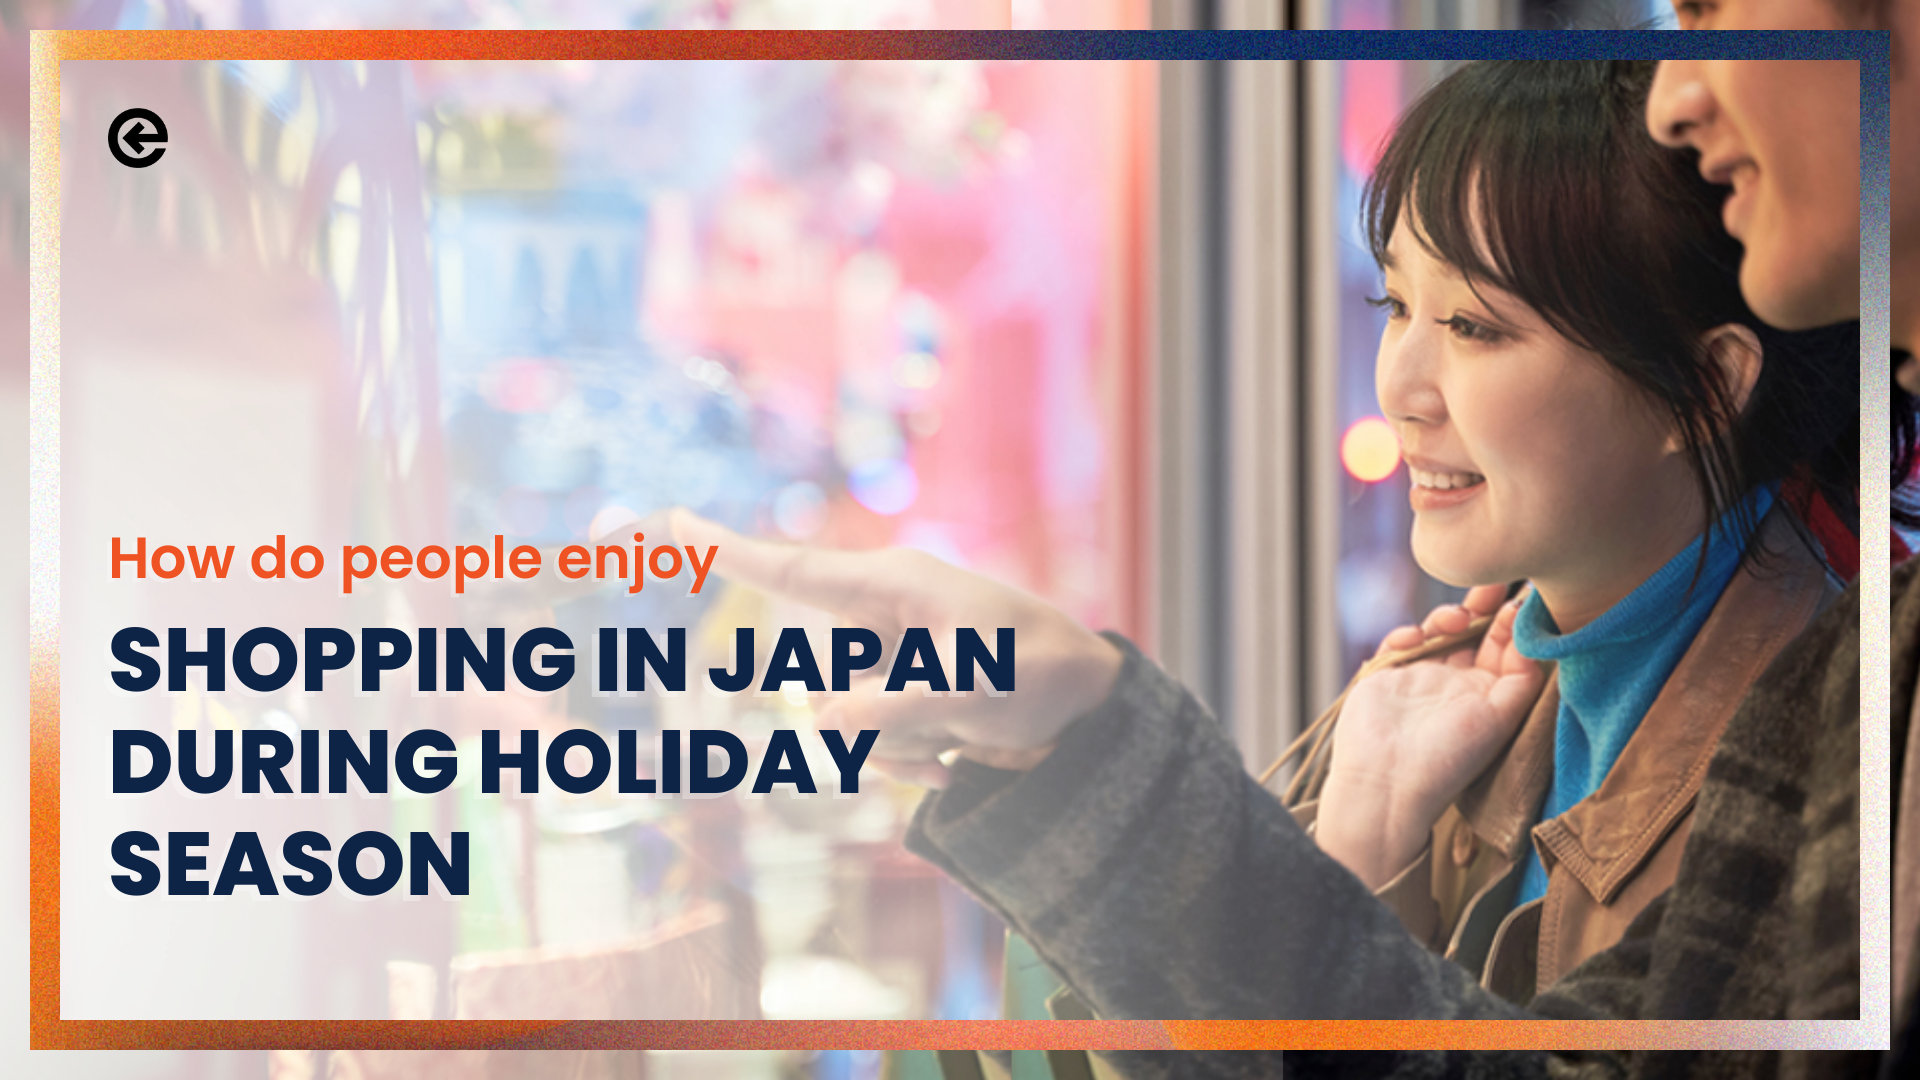 How Do People Enjoy Shopping in Japan during Holiday Season?